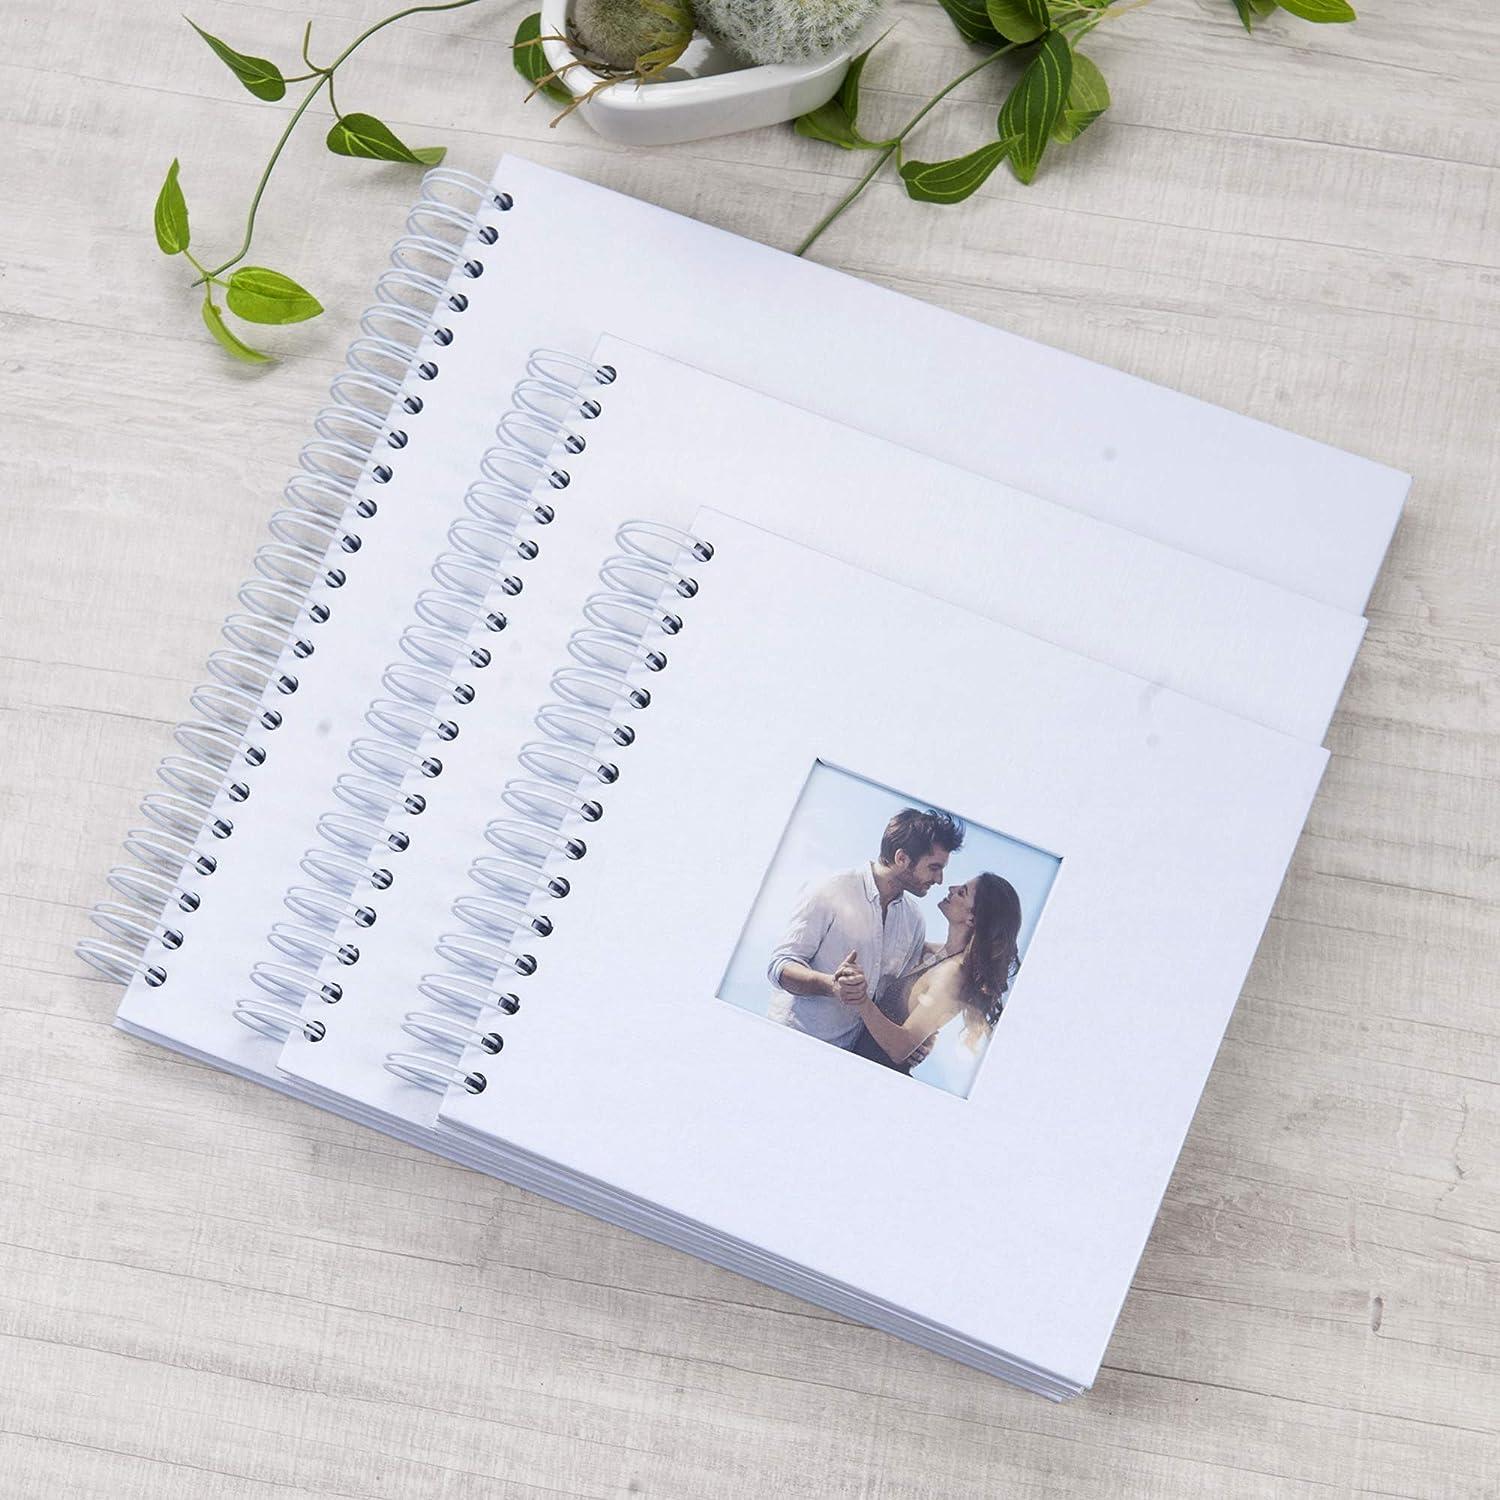 8 x 8 Inch Small DIY Scrapbook Photo Album with Cover Photo 80 Pages  Hardcover Craft Paper Photo Album for Guest Book, Anniversary, Valentines  Day